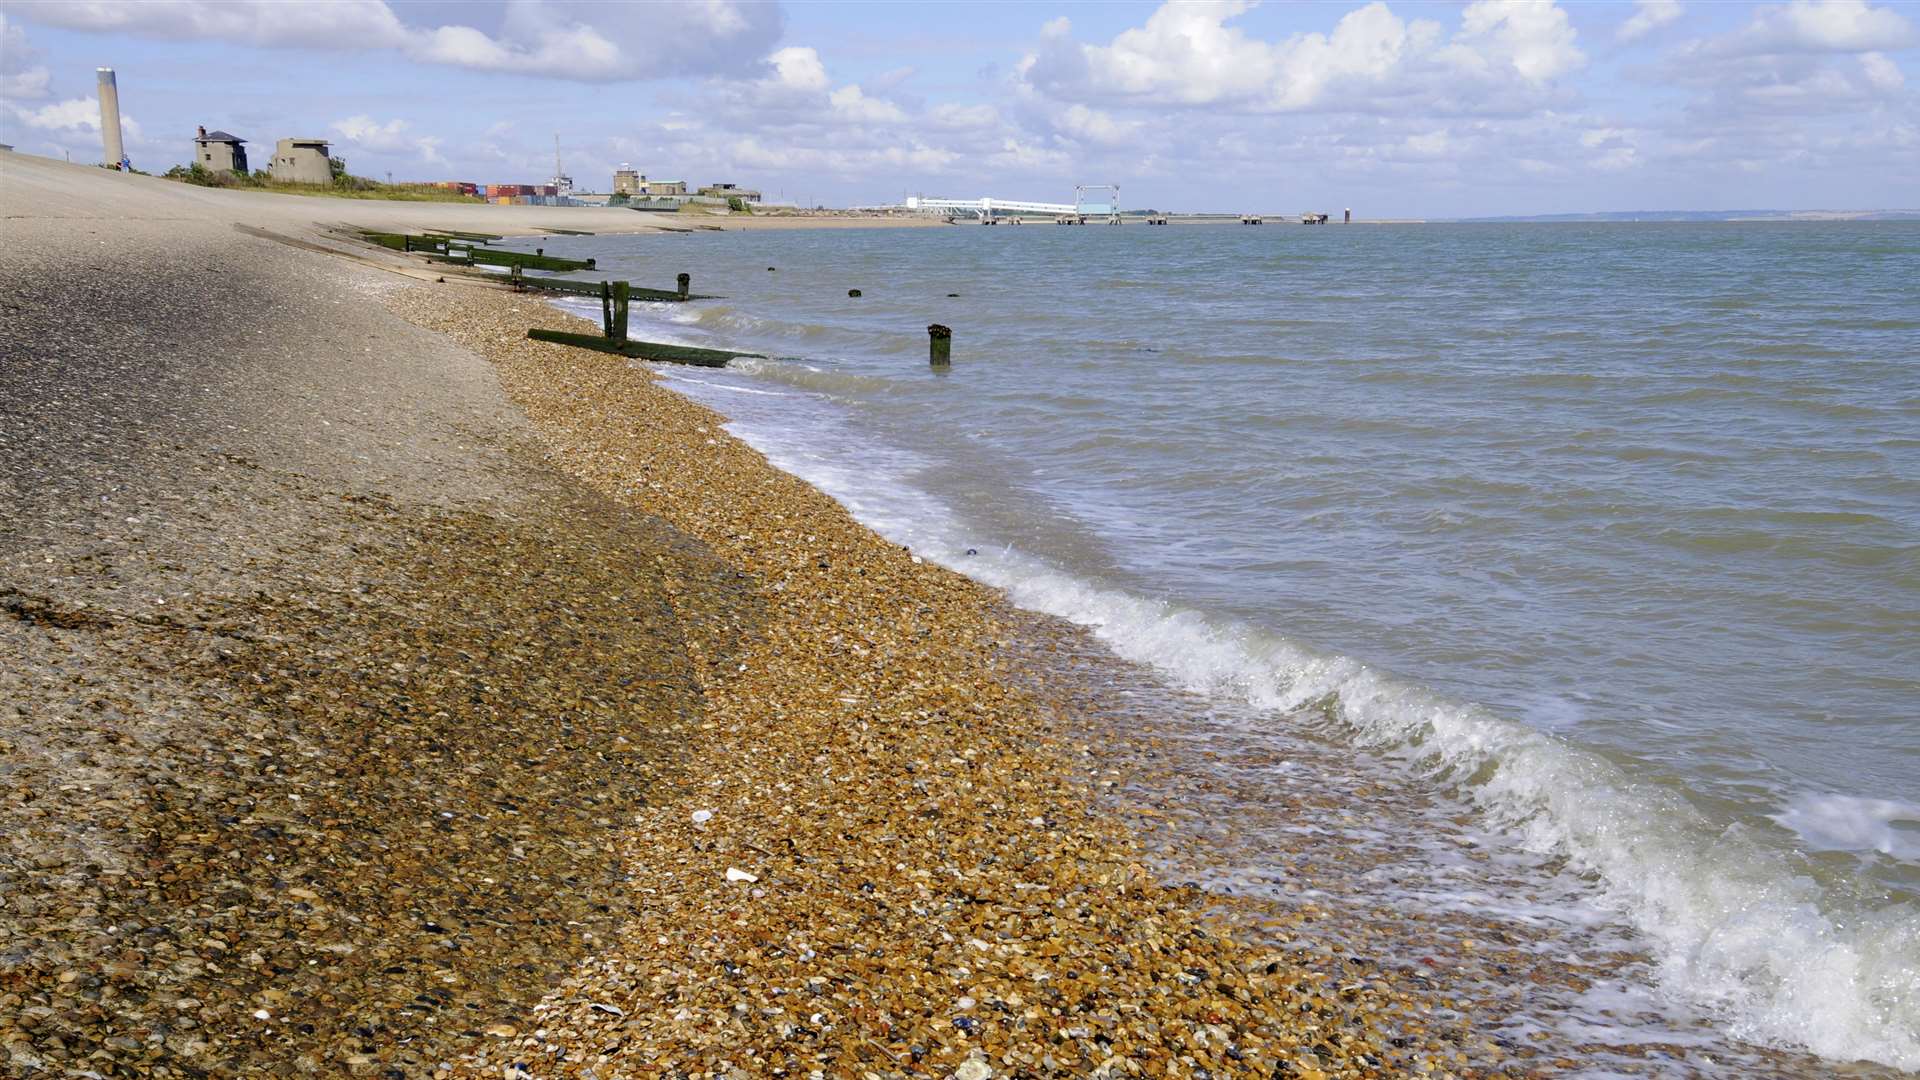 Sheerness offers a family-friendly day out